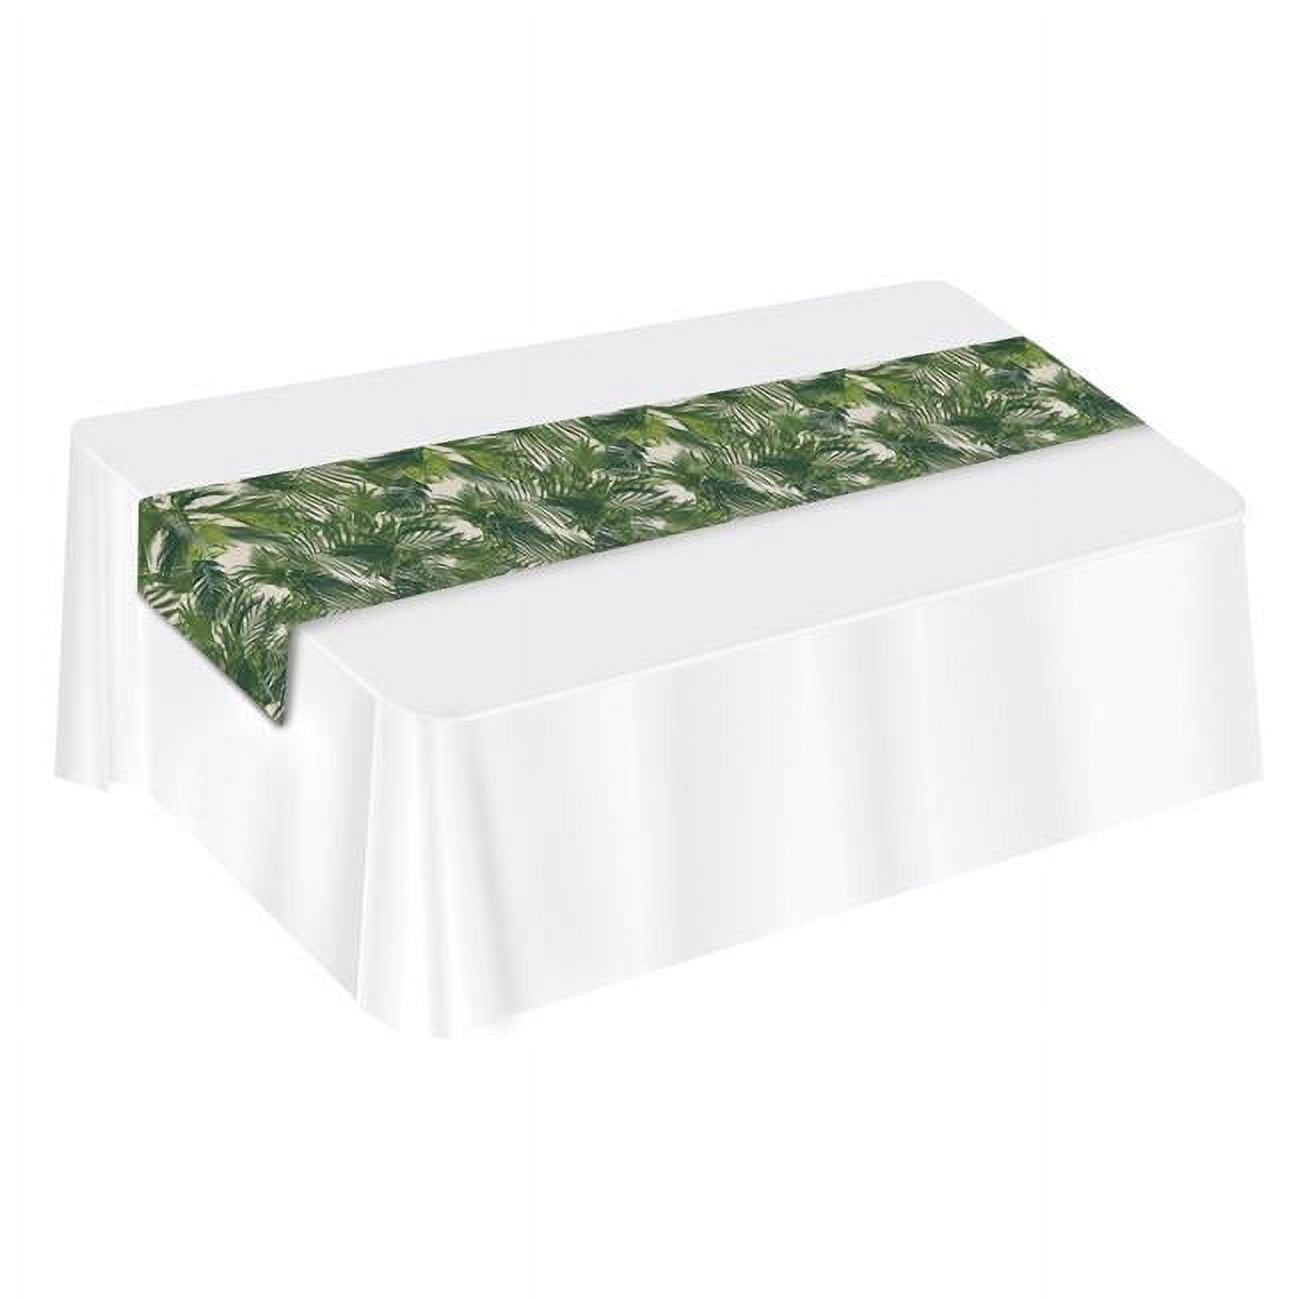 Picture of Beistle 53853 Palm Leaf Fabric Table Runner